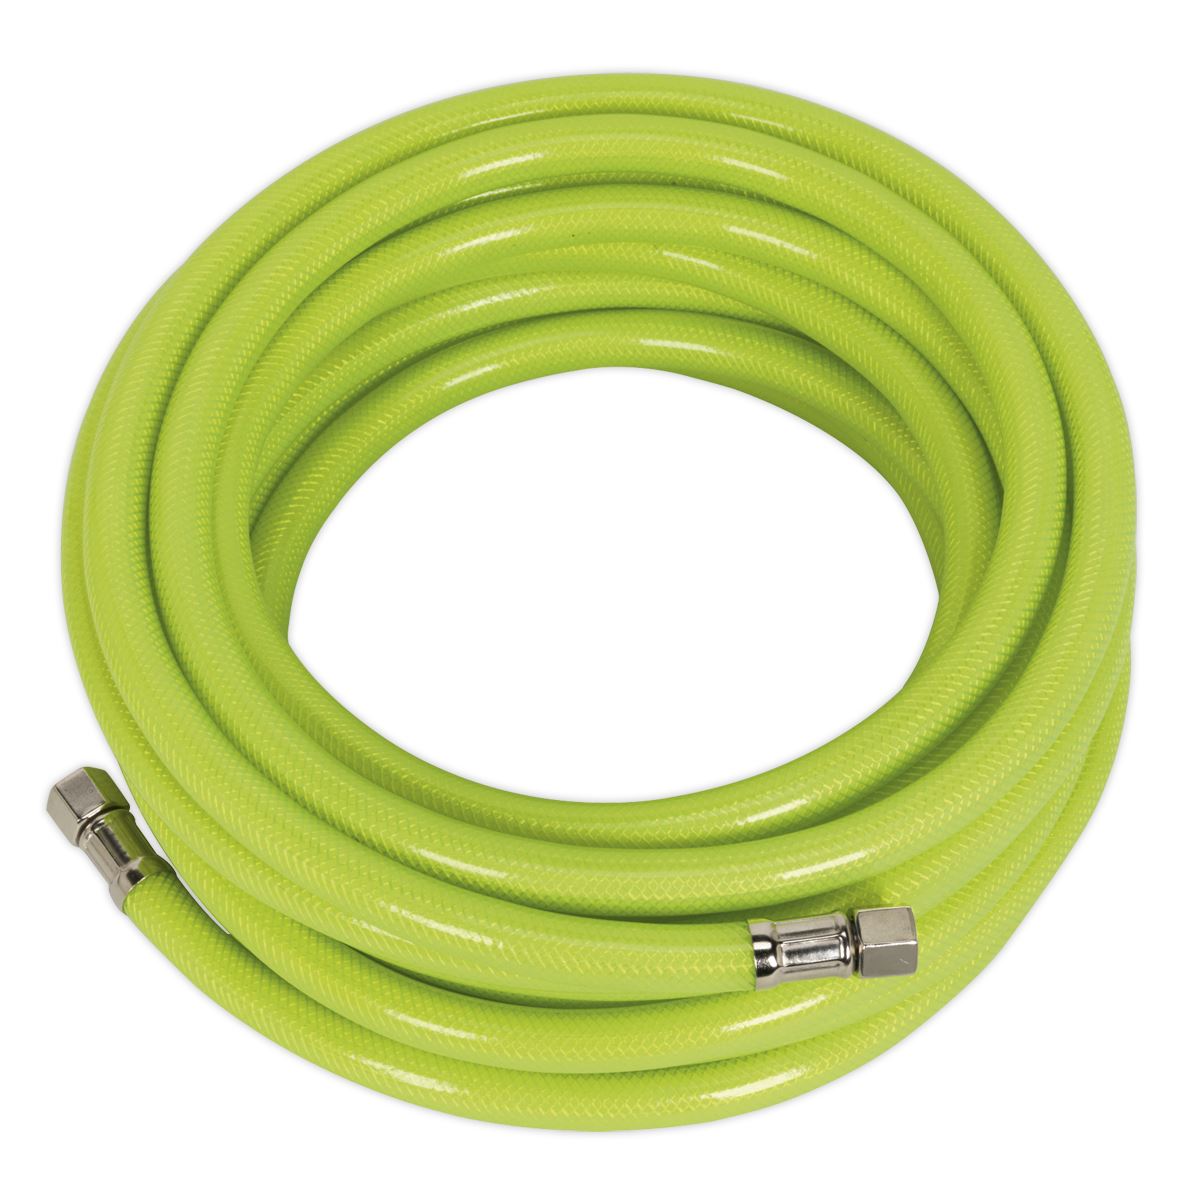 Sealey Air Hose High-Visibility 10m x Ø8mm with 1/4"BSP Unions